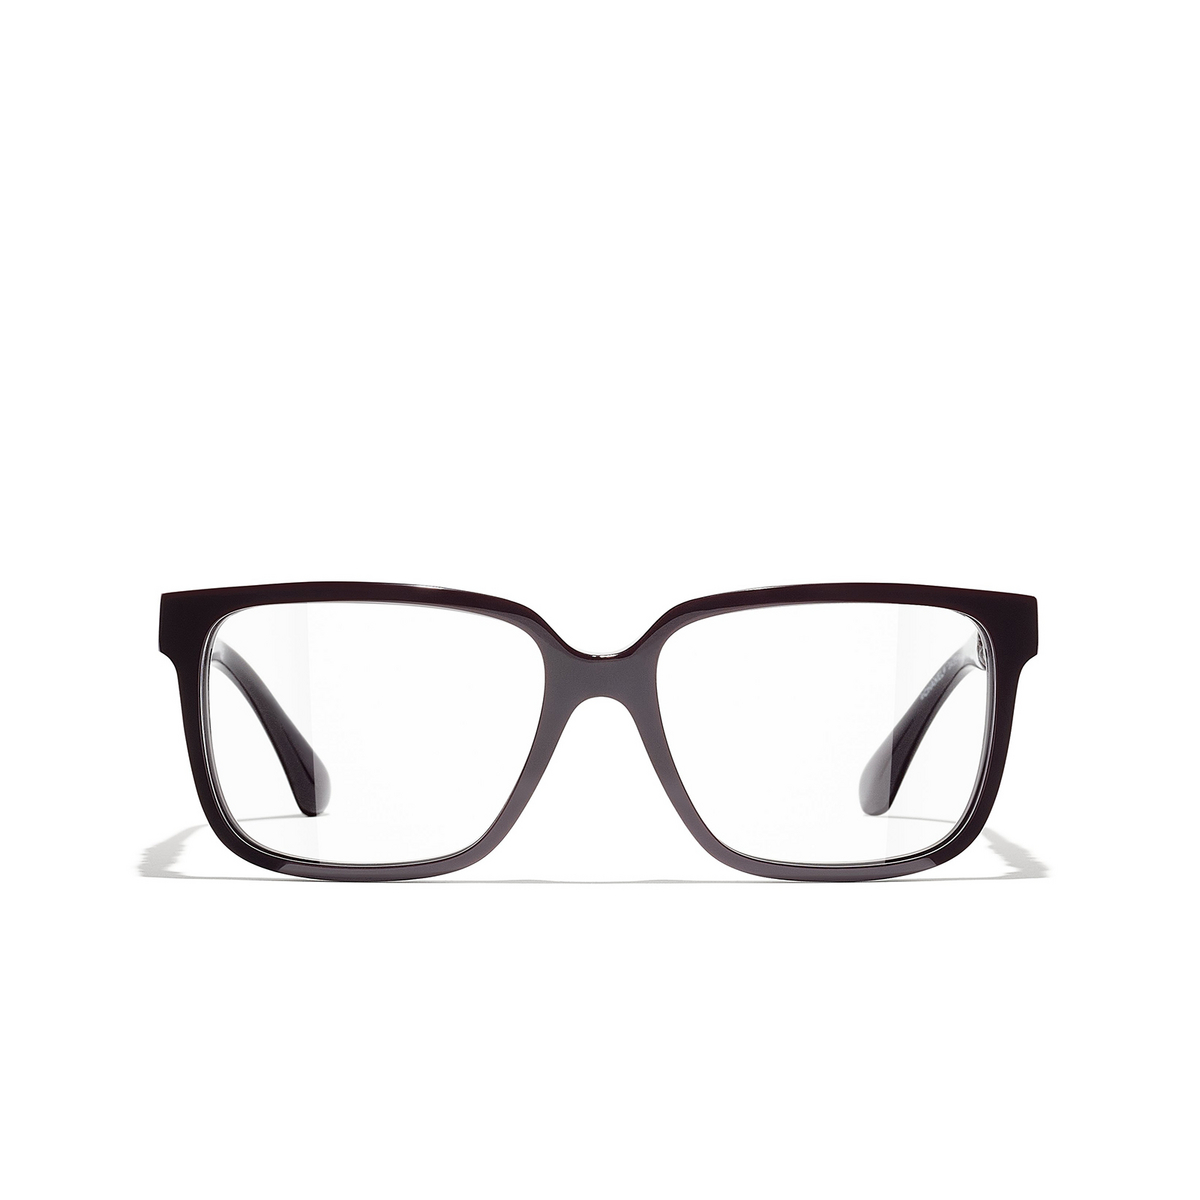 CHANEL square Eyeglasses 1461 Burgundy - front view